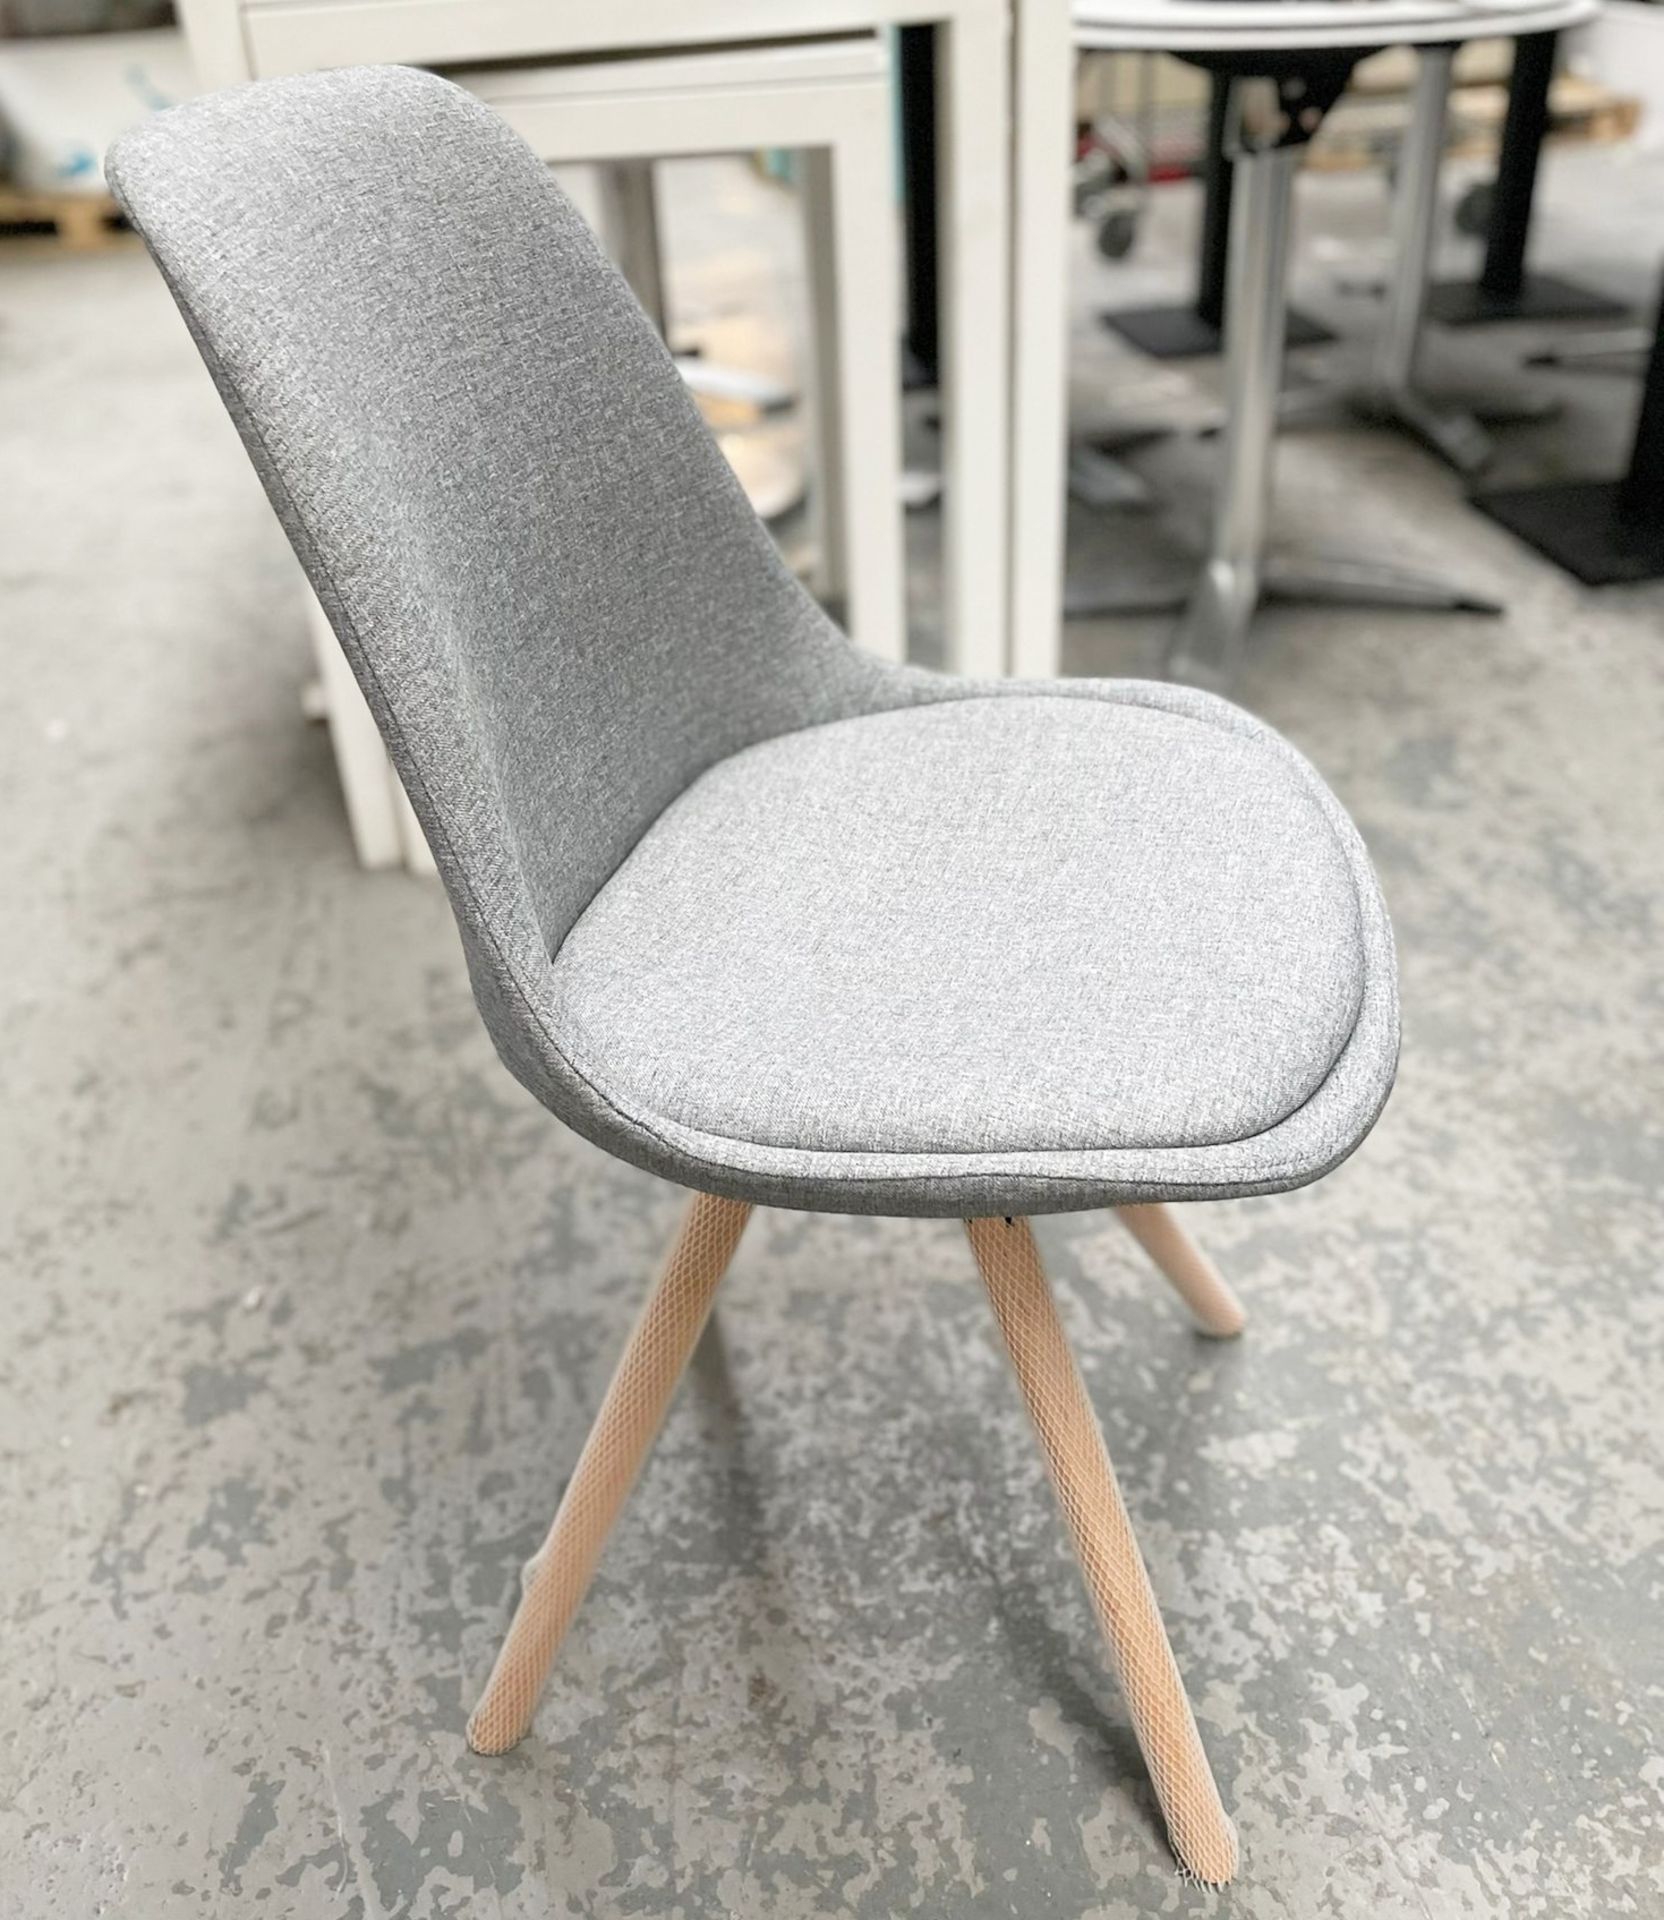 4 x Upholstered Turner Chair In Grey- Dimensions: 86(h) x 50(w) x 40(d) cm - Brand New Unboxed - Image 4 of 6